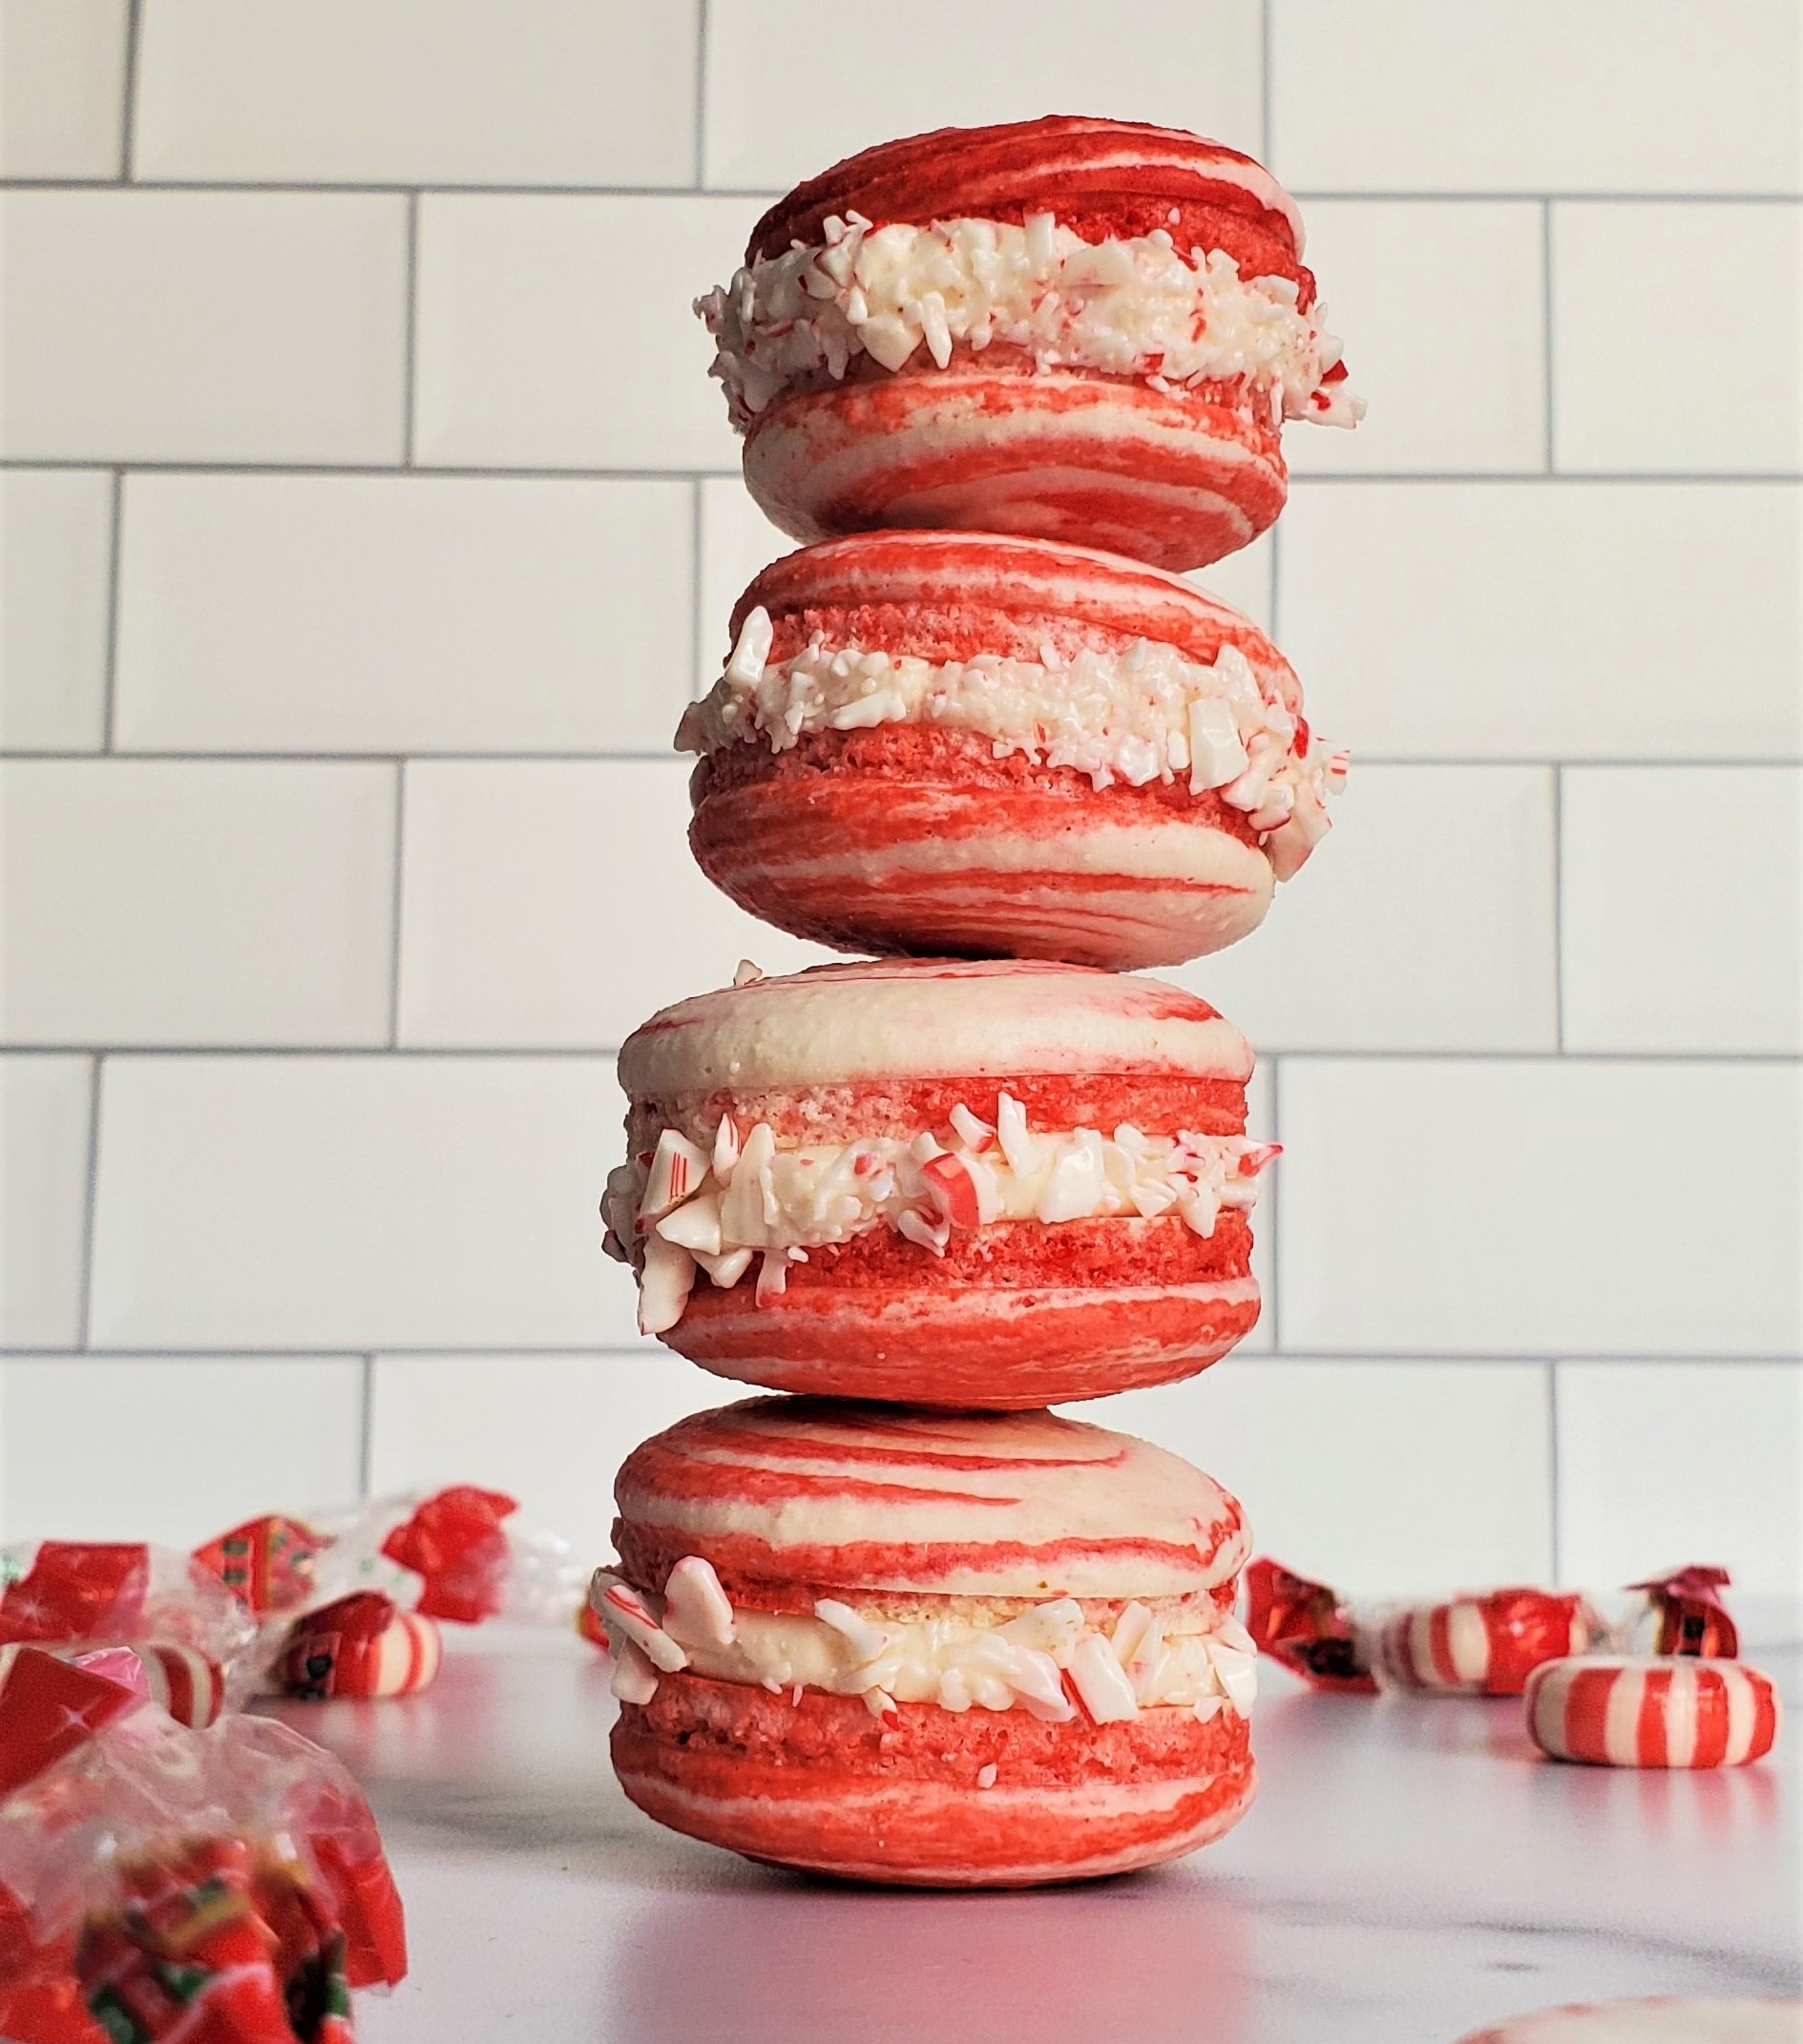 A stack of 4 peppermint macarons, up against a subway tile background, on a white marble surface. Surrounded by peppermints and their wrappers.